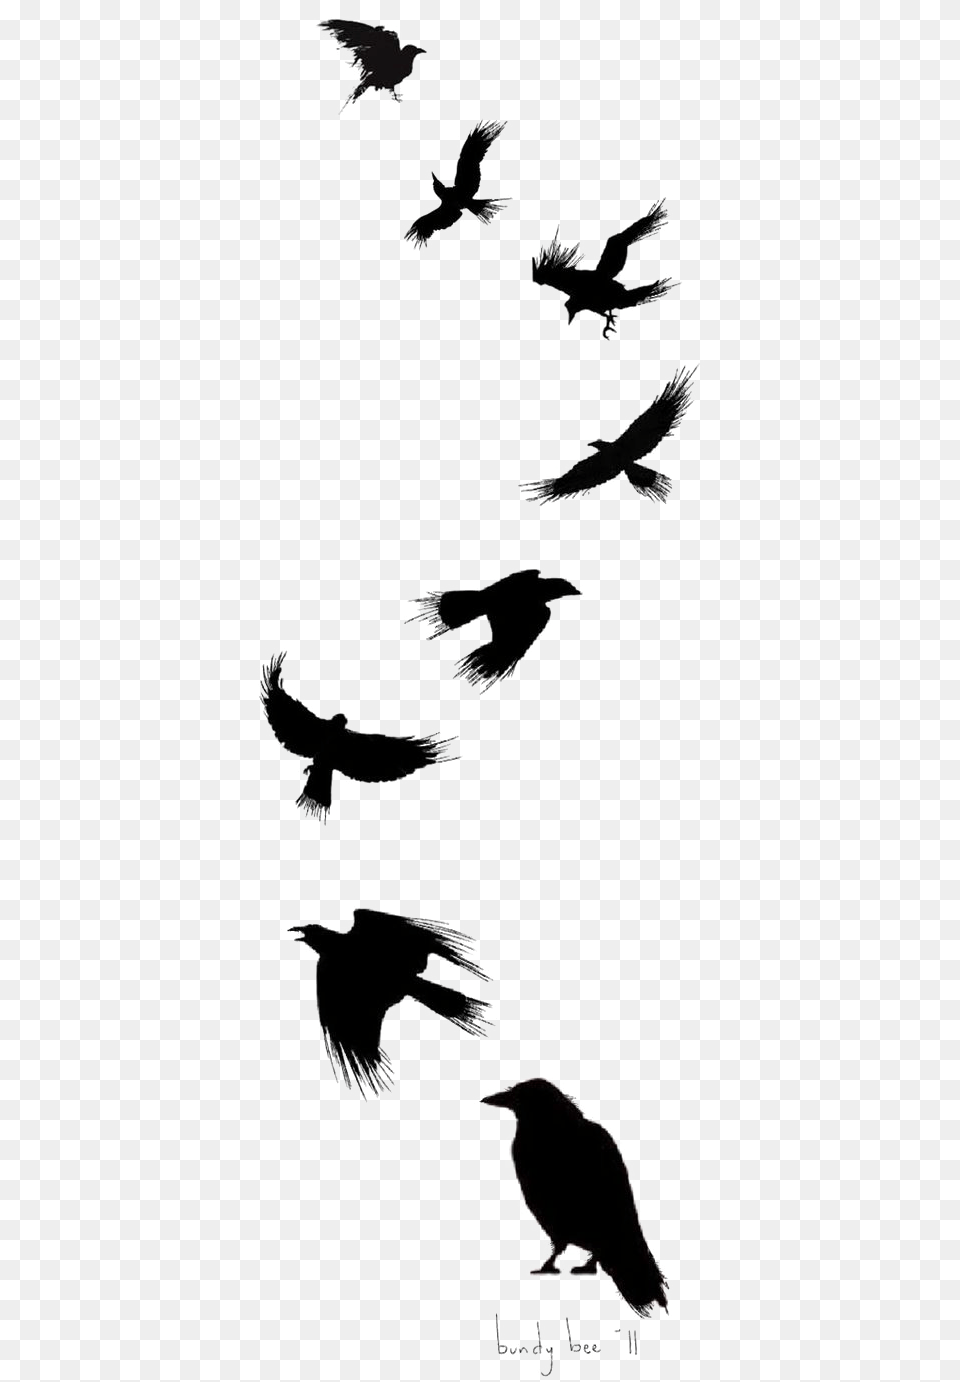 Tattoo Flight Crow Drawing Common Ink Bird Clipart Raven Silhouette Tattoo, Animal, Water, Outdoors, Stencil Png